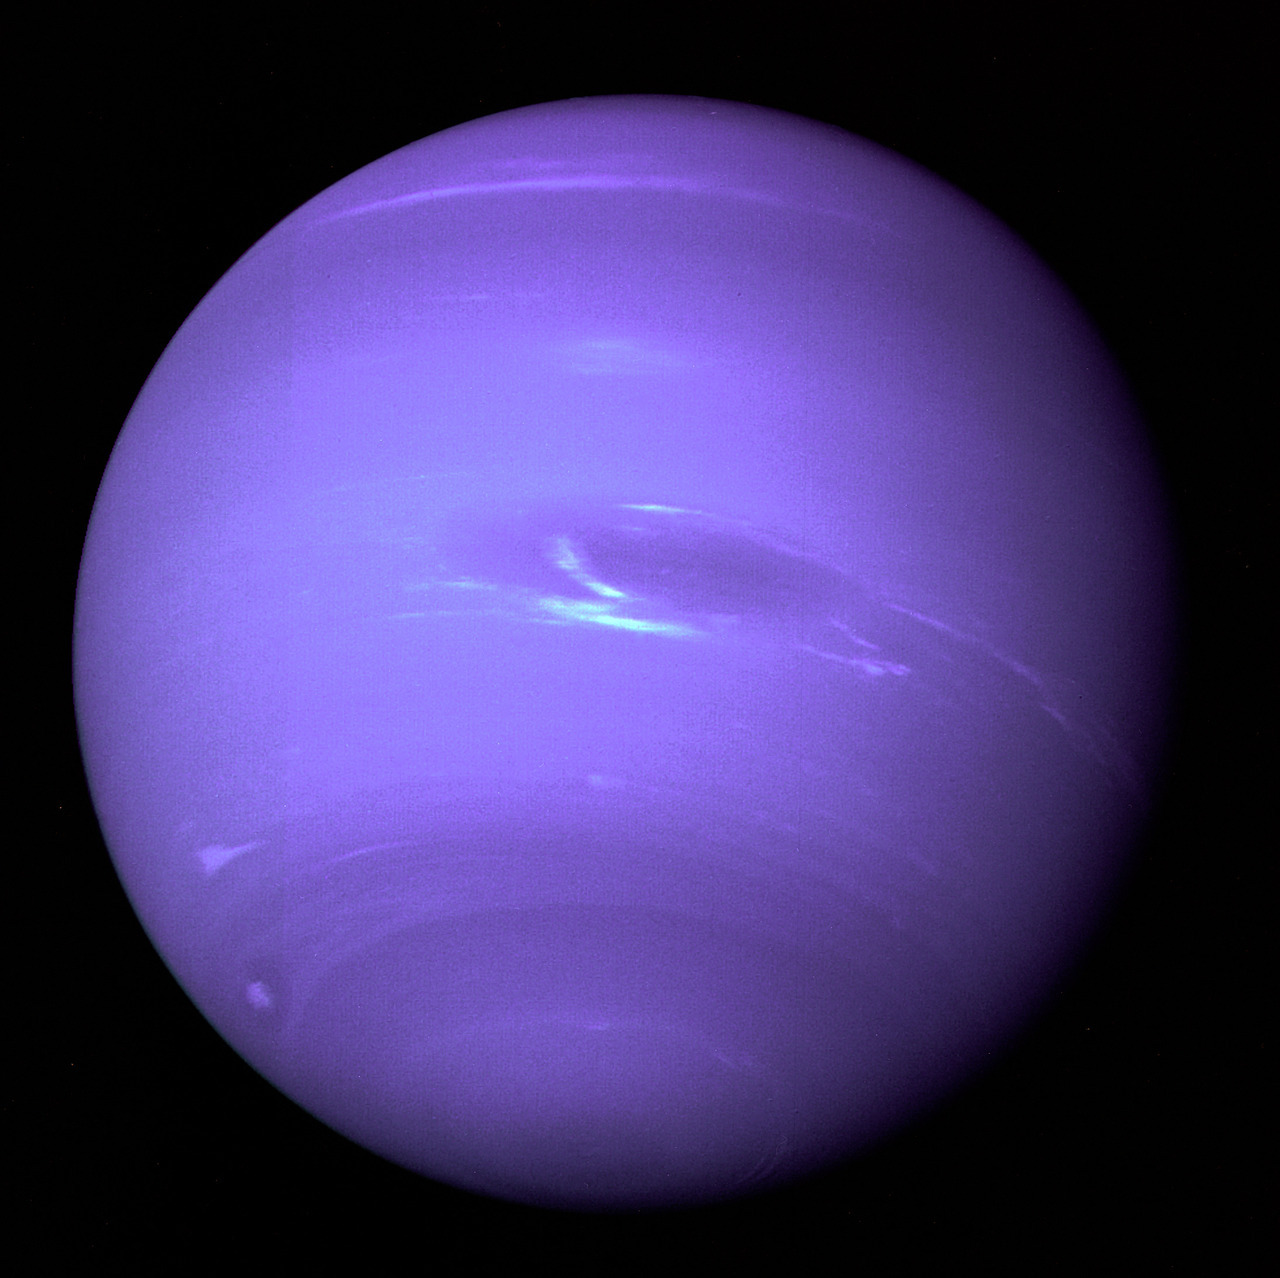 space-pics:This picture of Neptune was produced from the last whole planet images